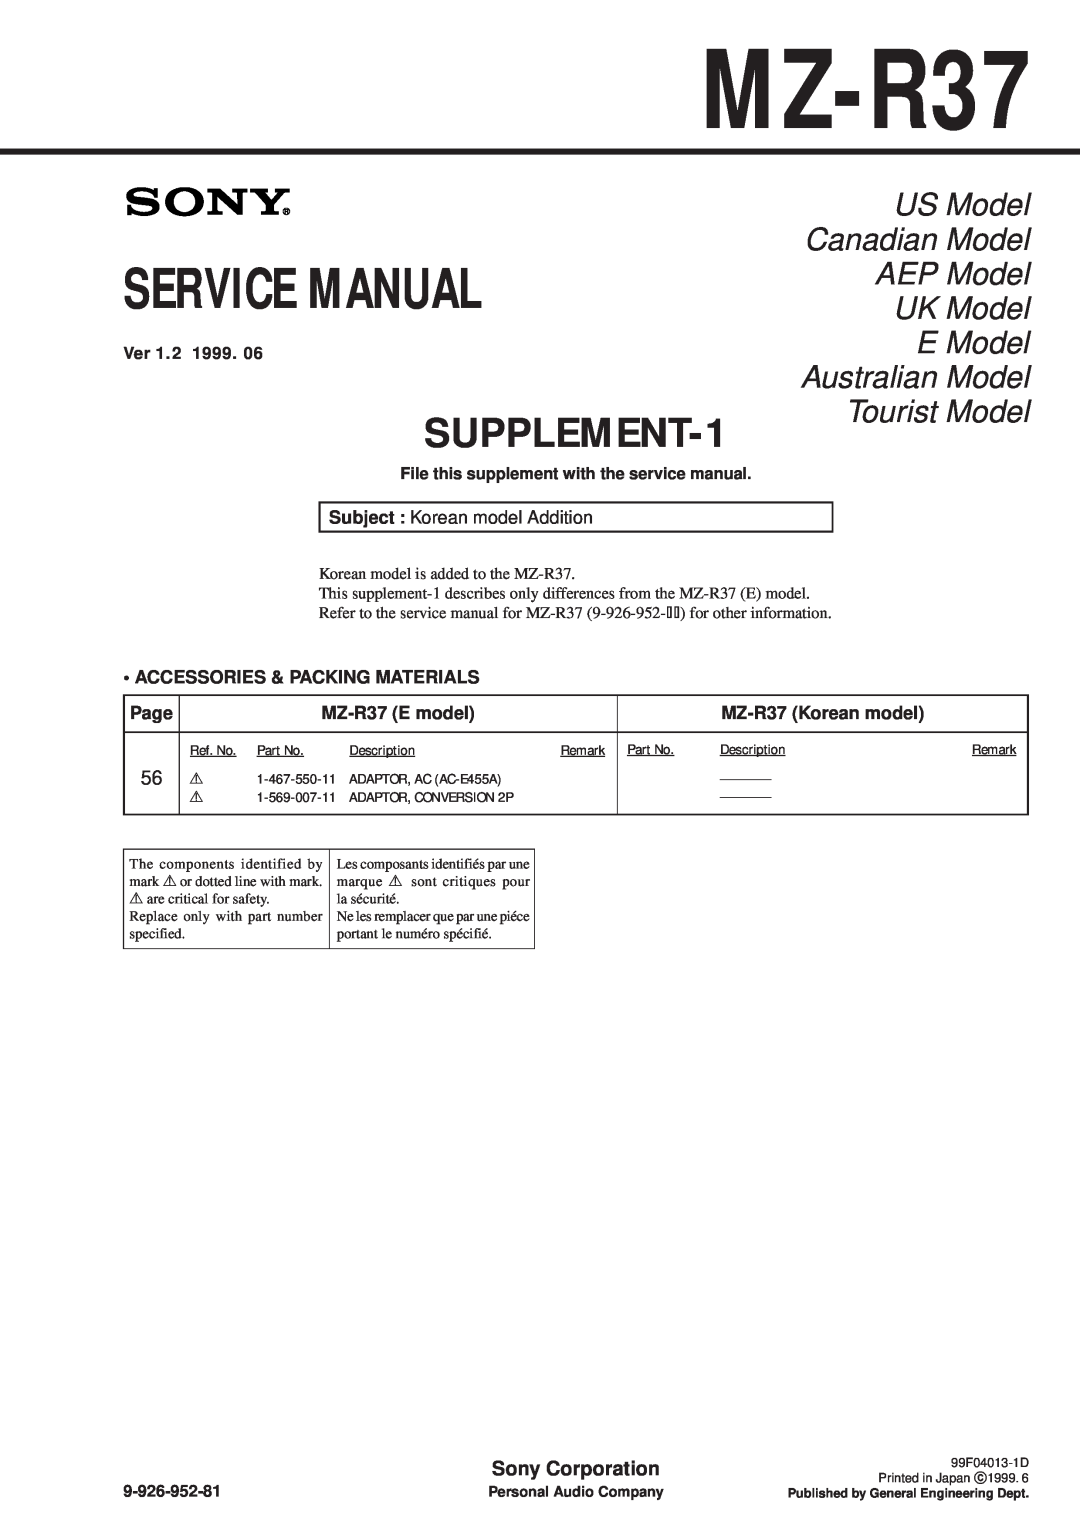 Sony MZ-R37 Service Manual, SUPPLEMENT-1, Ver 1.2 1999, Subject : Korean model Addition, • Accessories & Packing Materials 